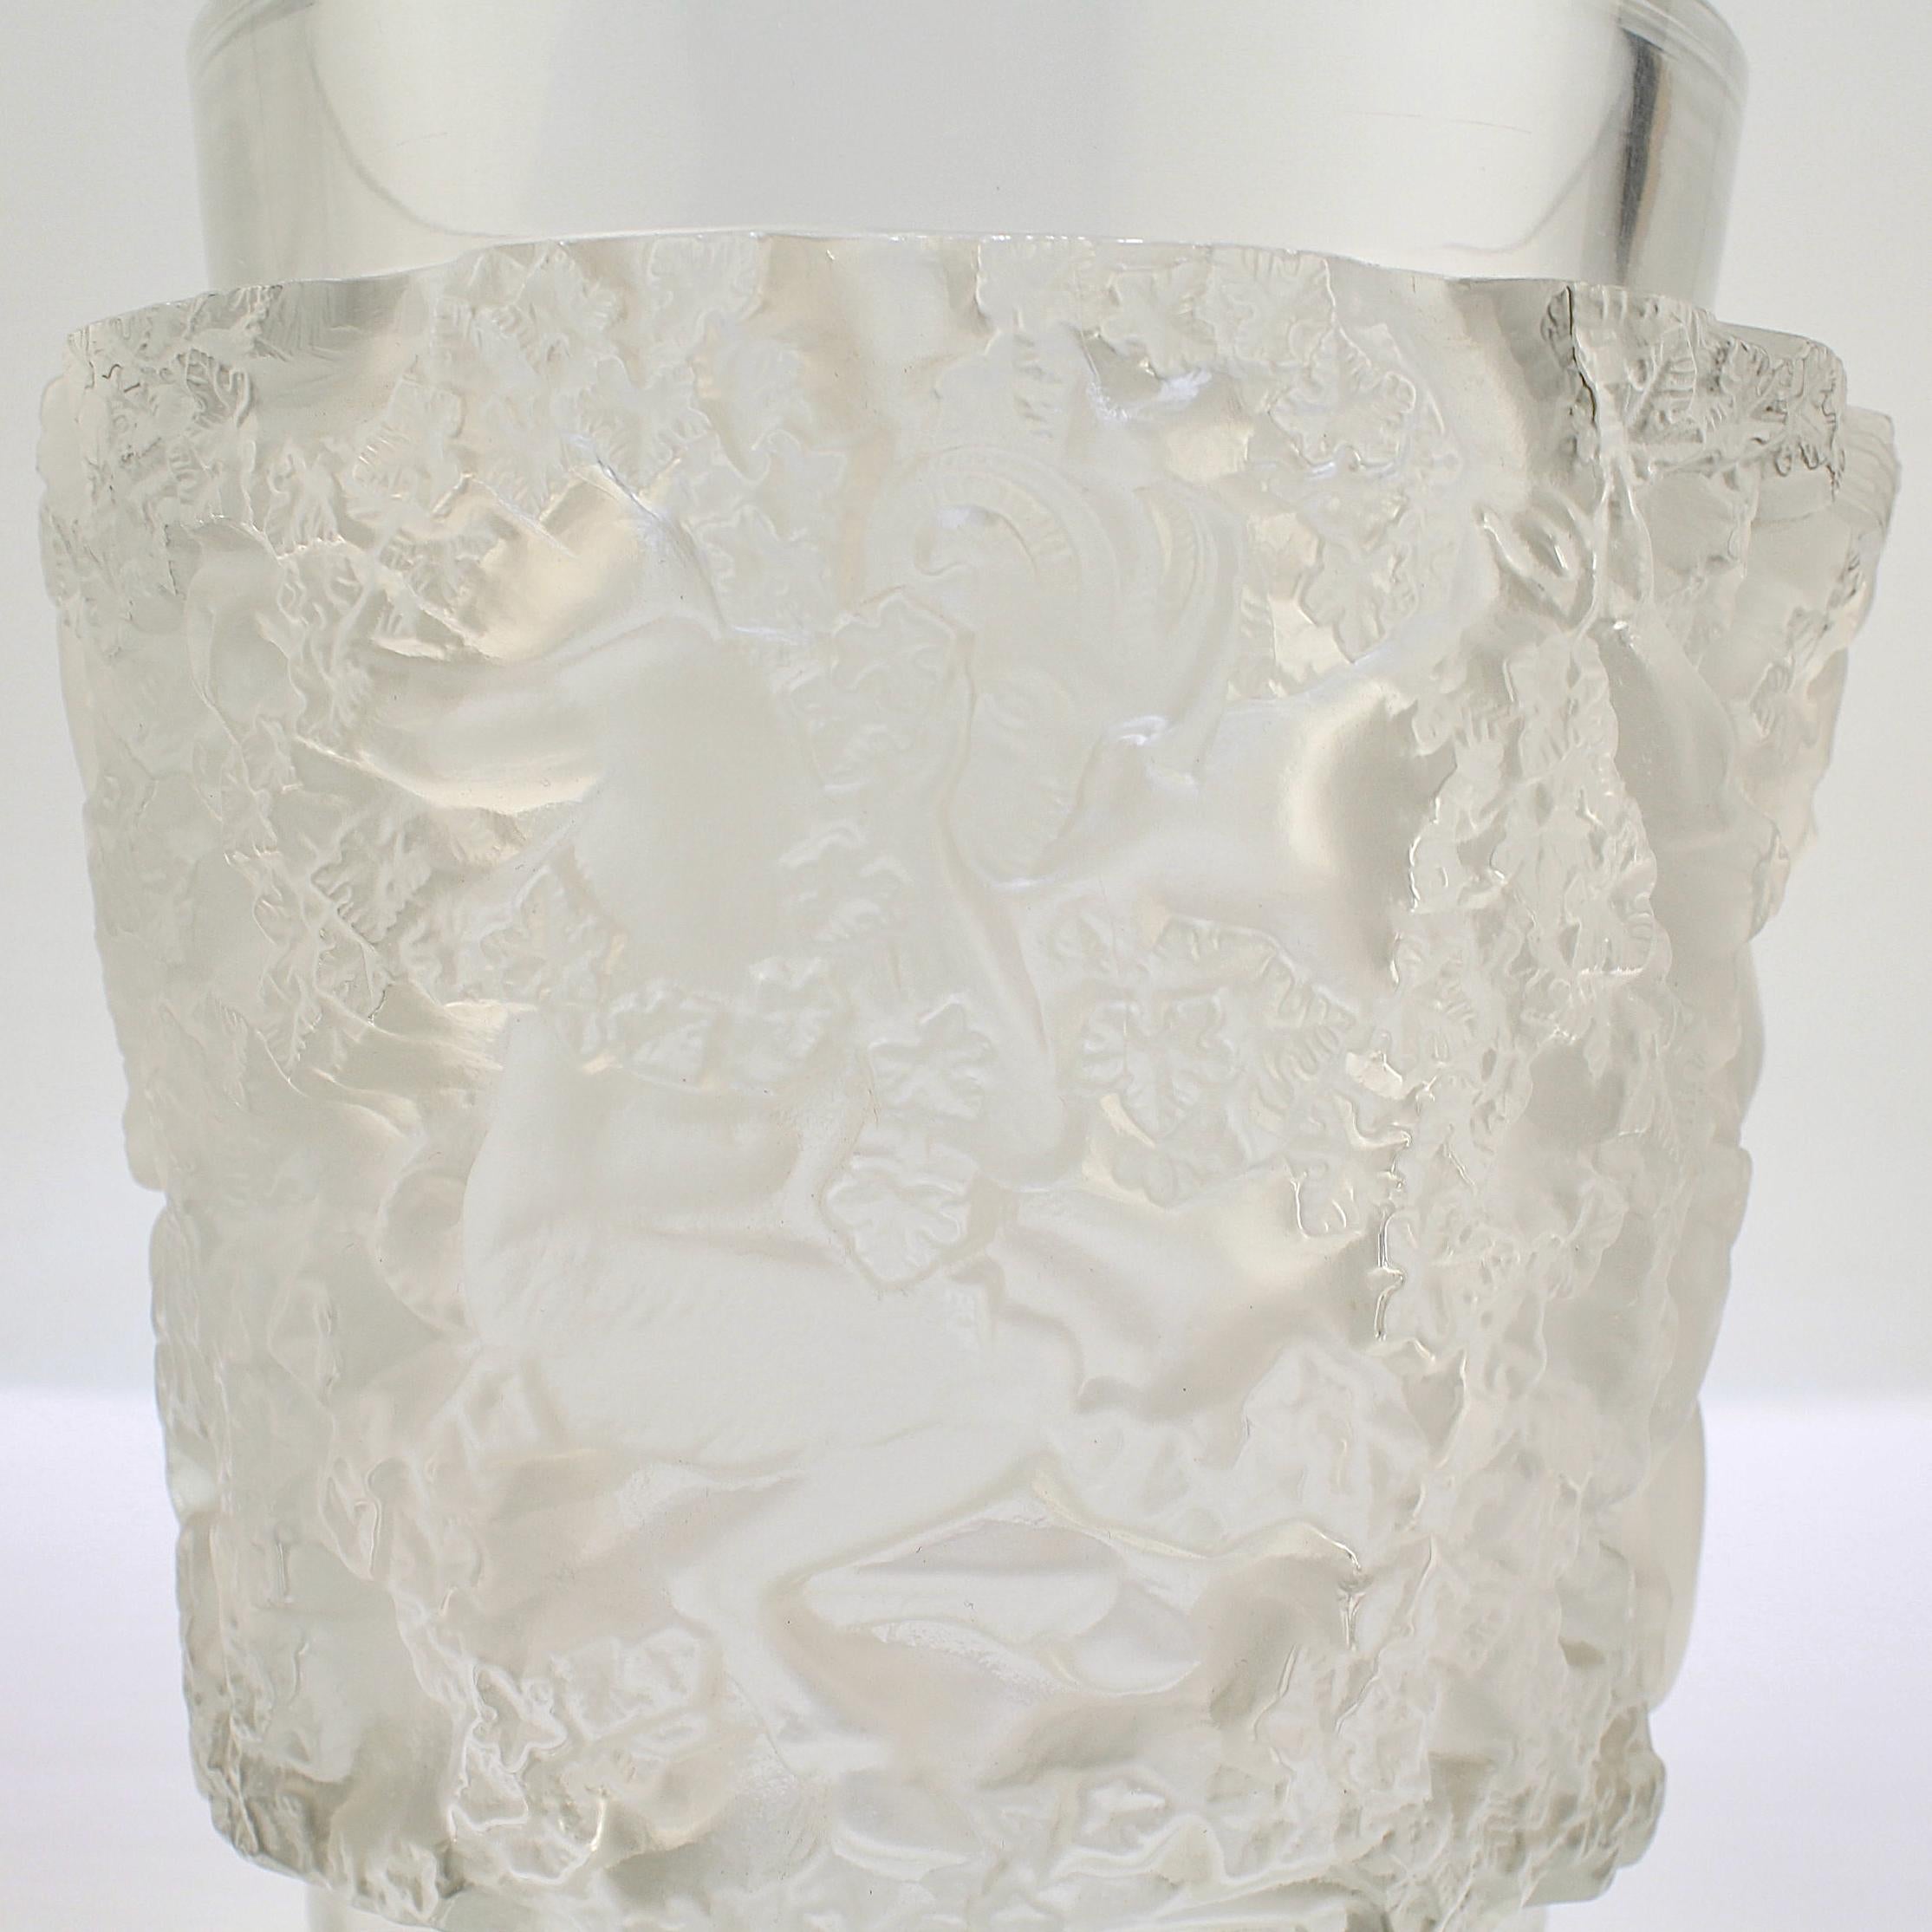 Old or Antique Lalique Frosted French Art Glass Bacchus Vase 3